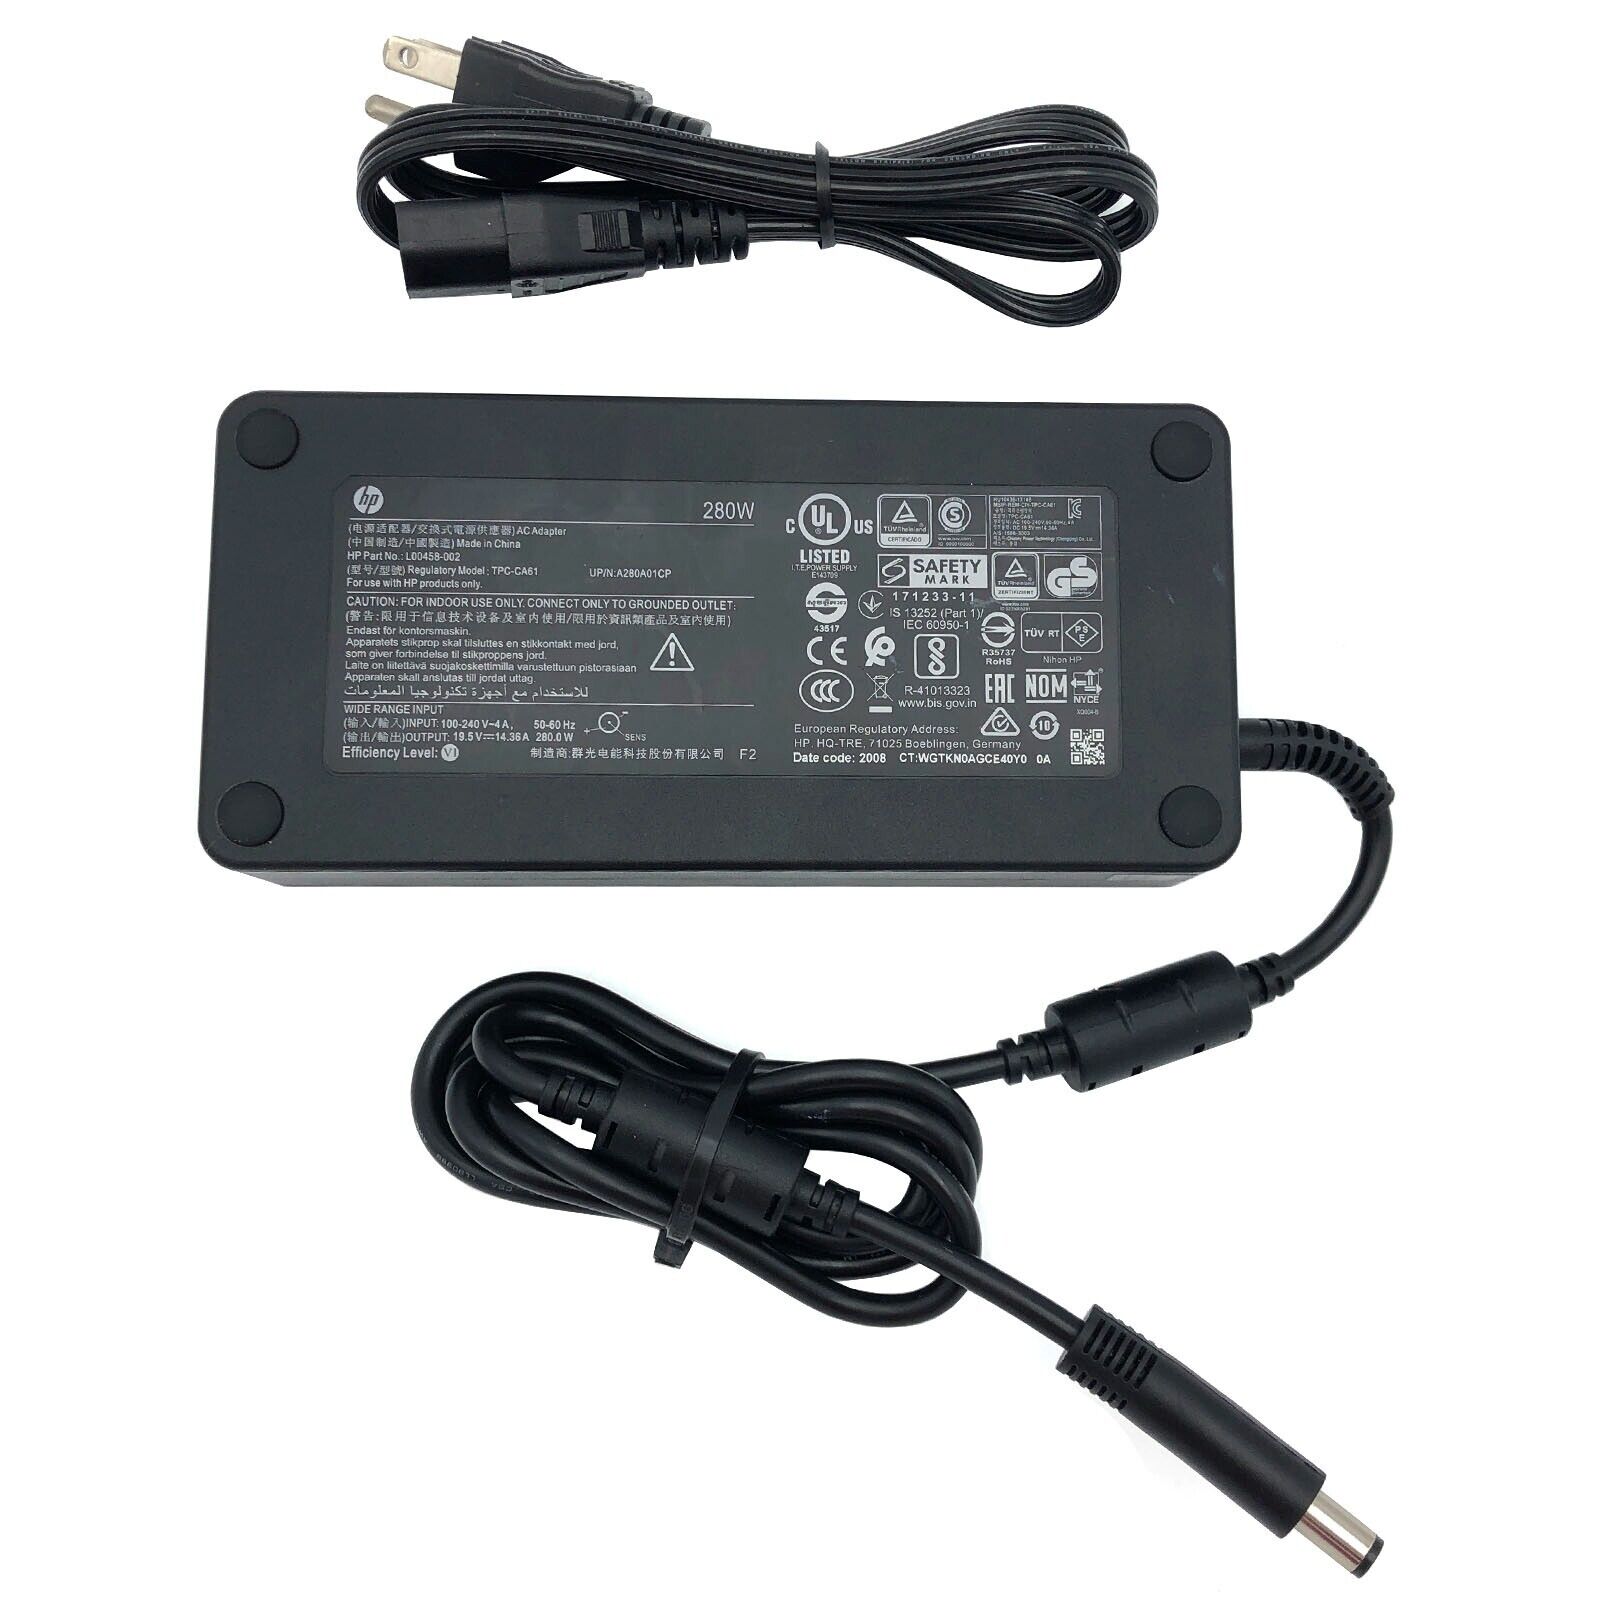 Genuine HP AC Adapter 19.5V 14.36A 280W Charger TPC-CA61 L00458-002 Power Supply